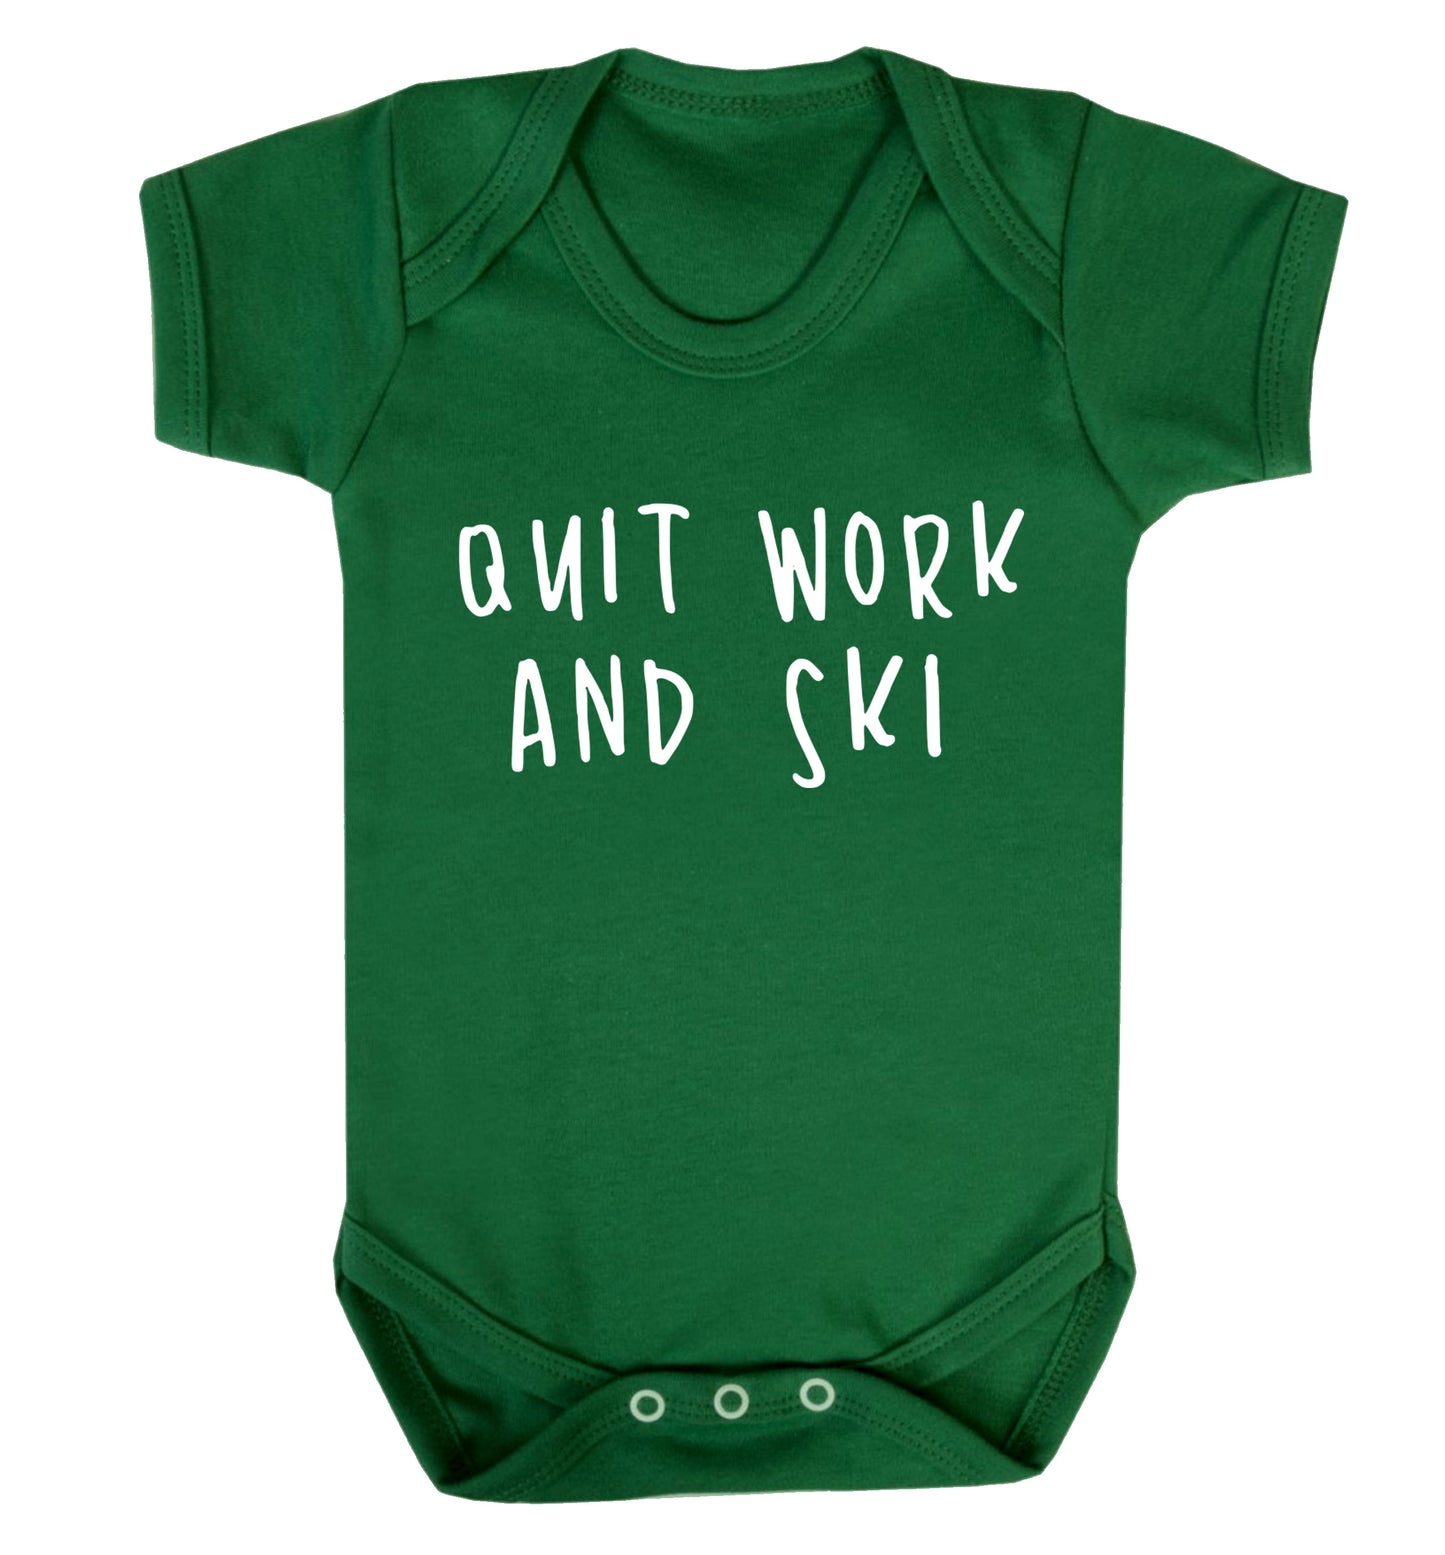 Quit work and ski Baby Vest green 18-24 months